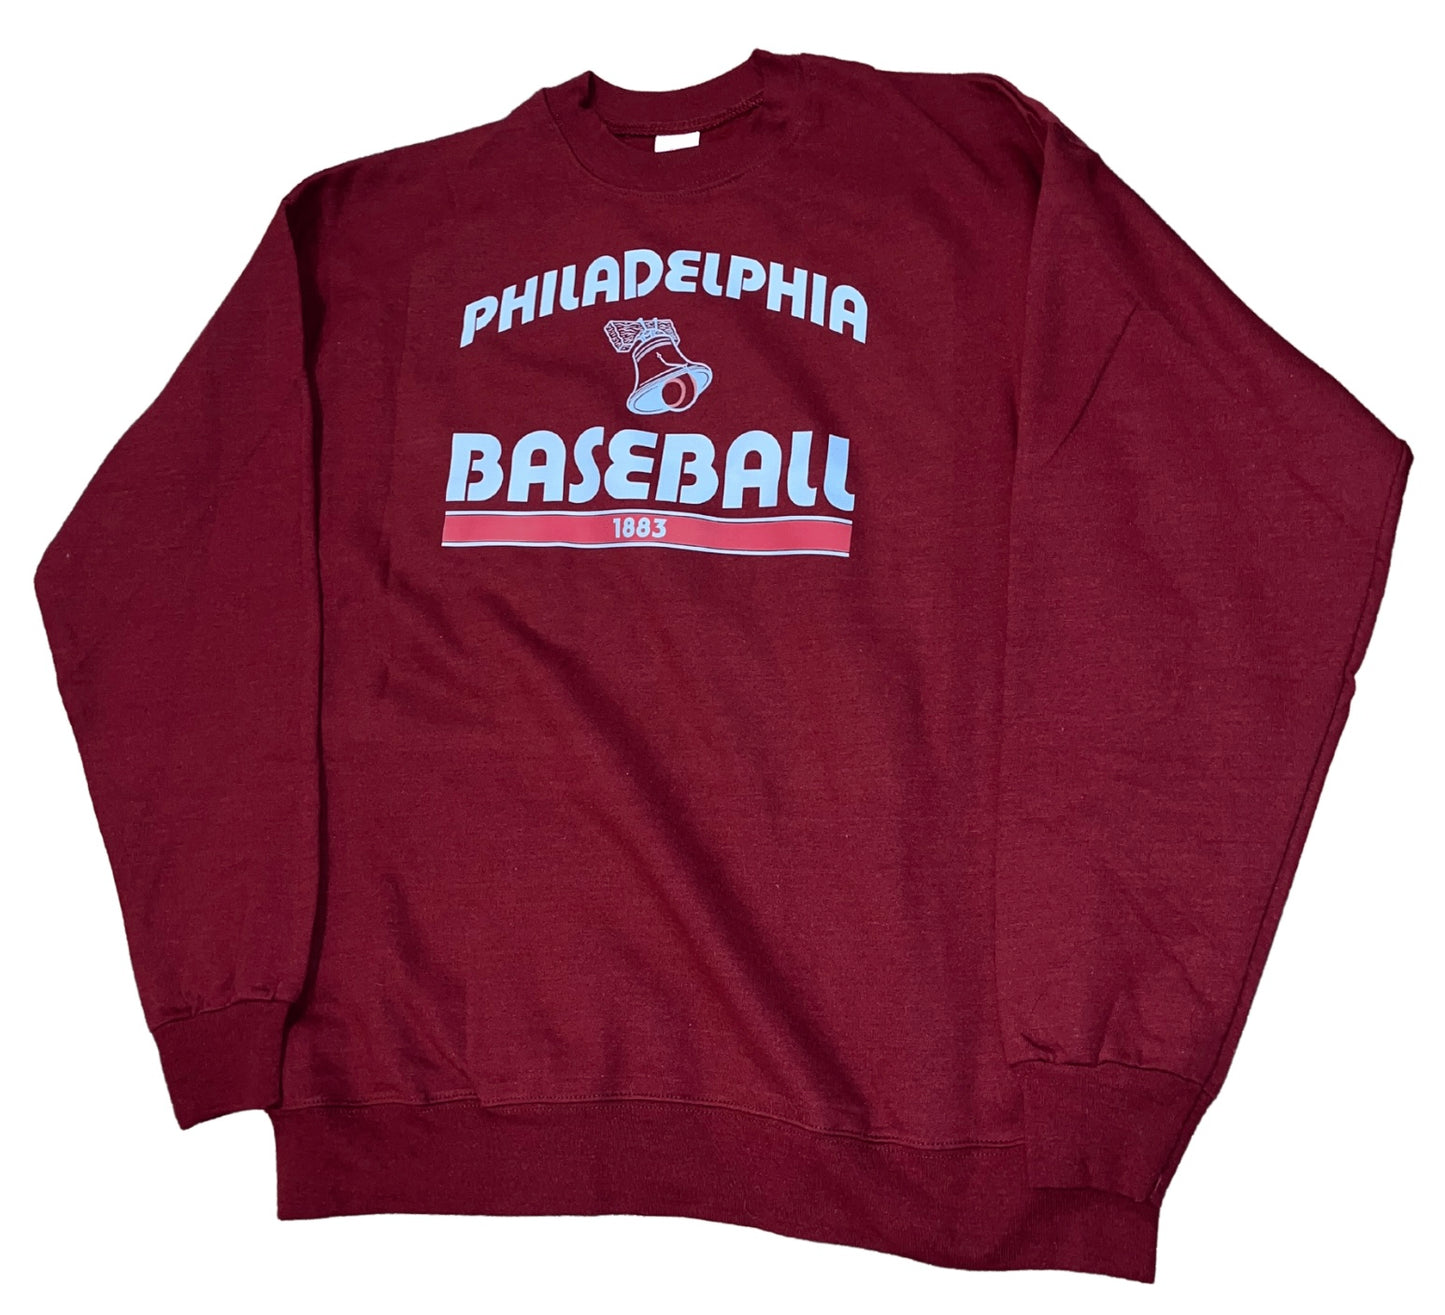 Philly Arched Baseball sweatshirt